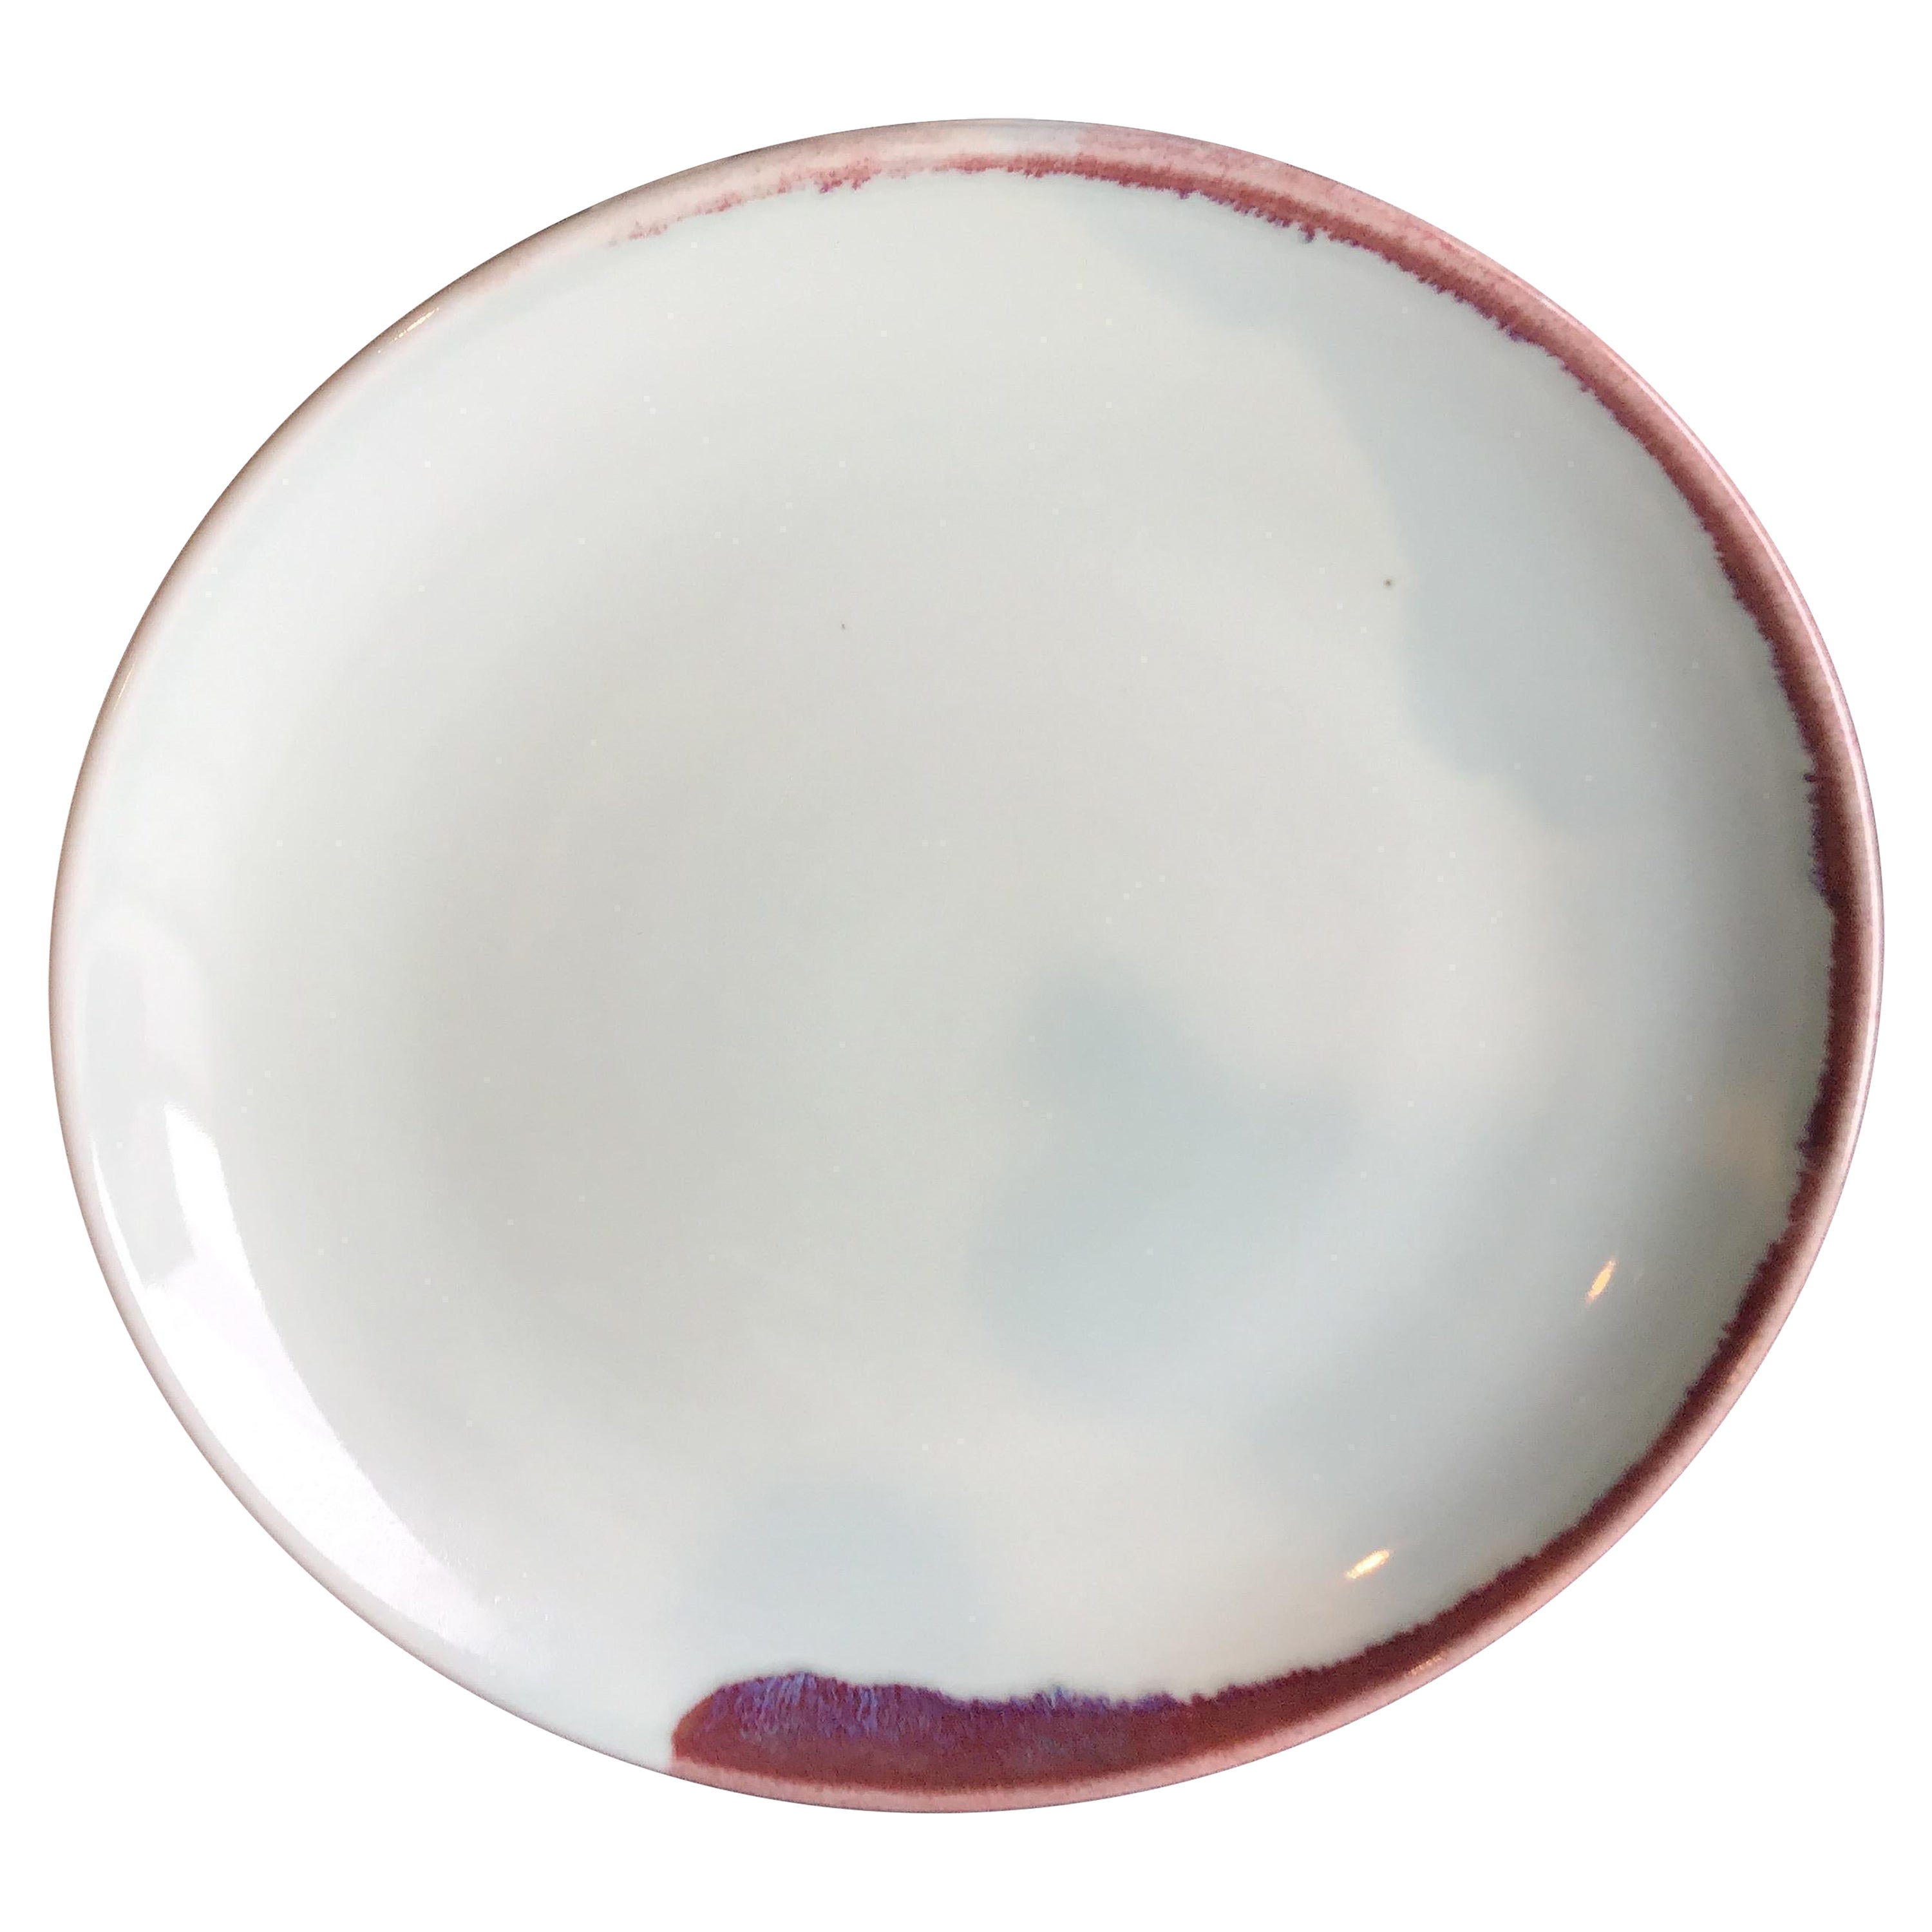 Large Spin Ceramics Dish with Red Accents